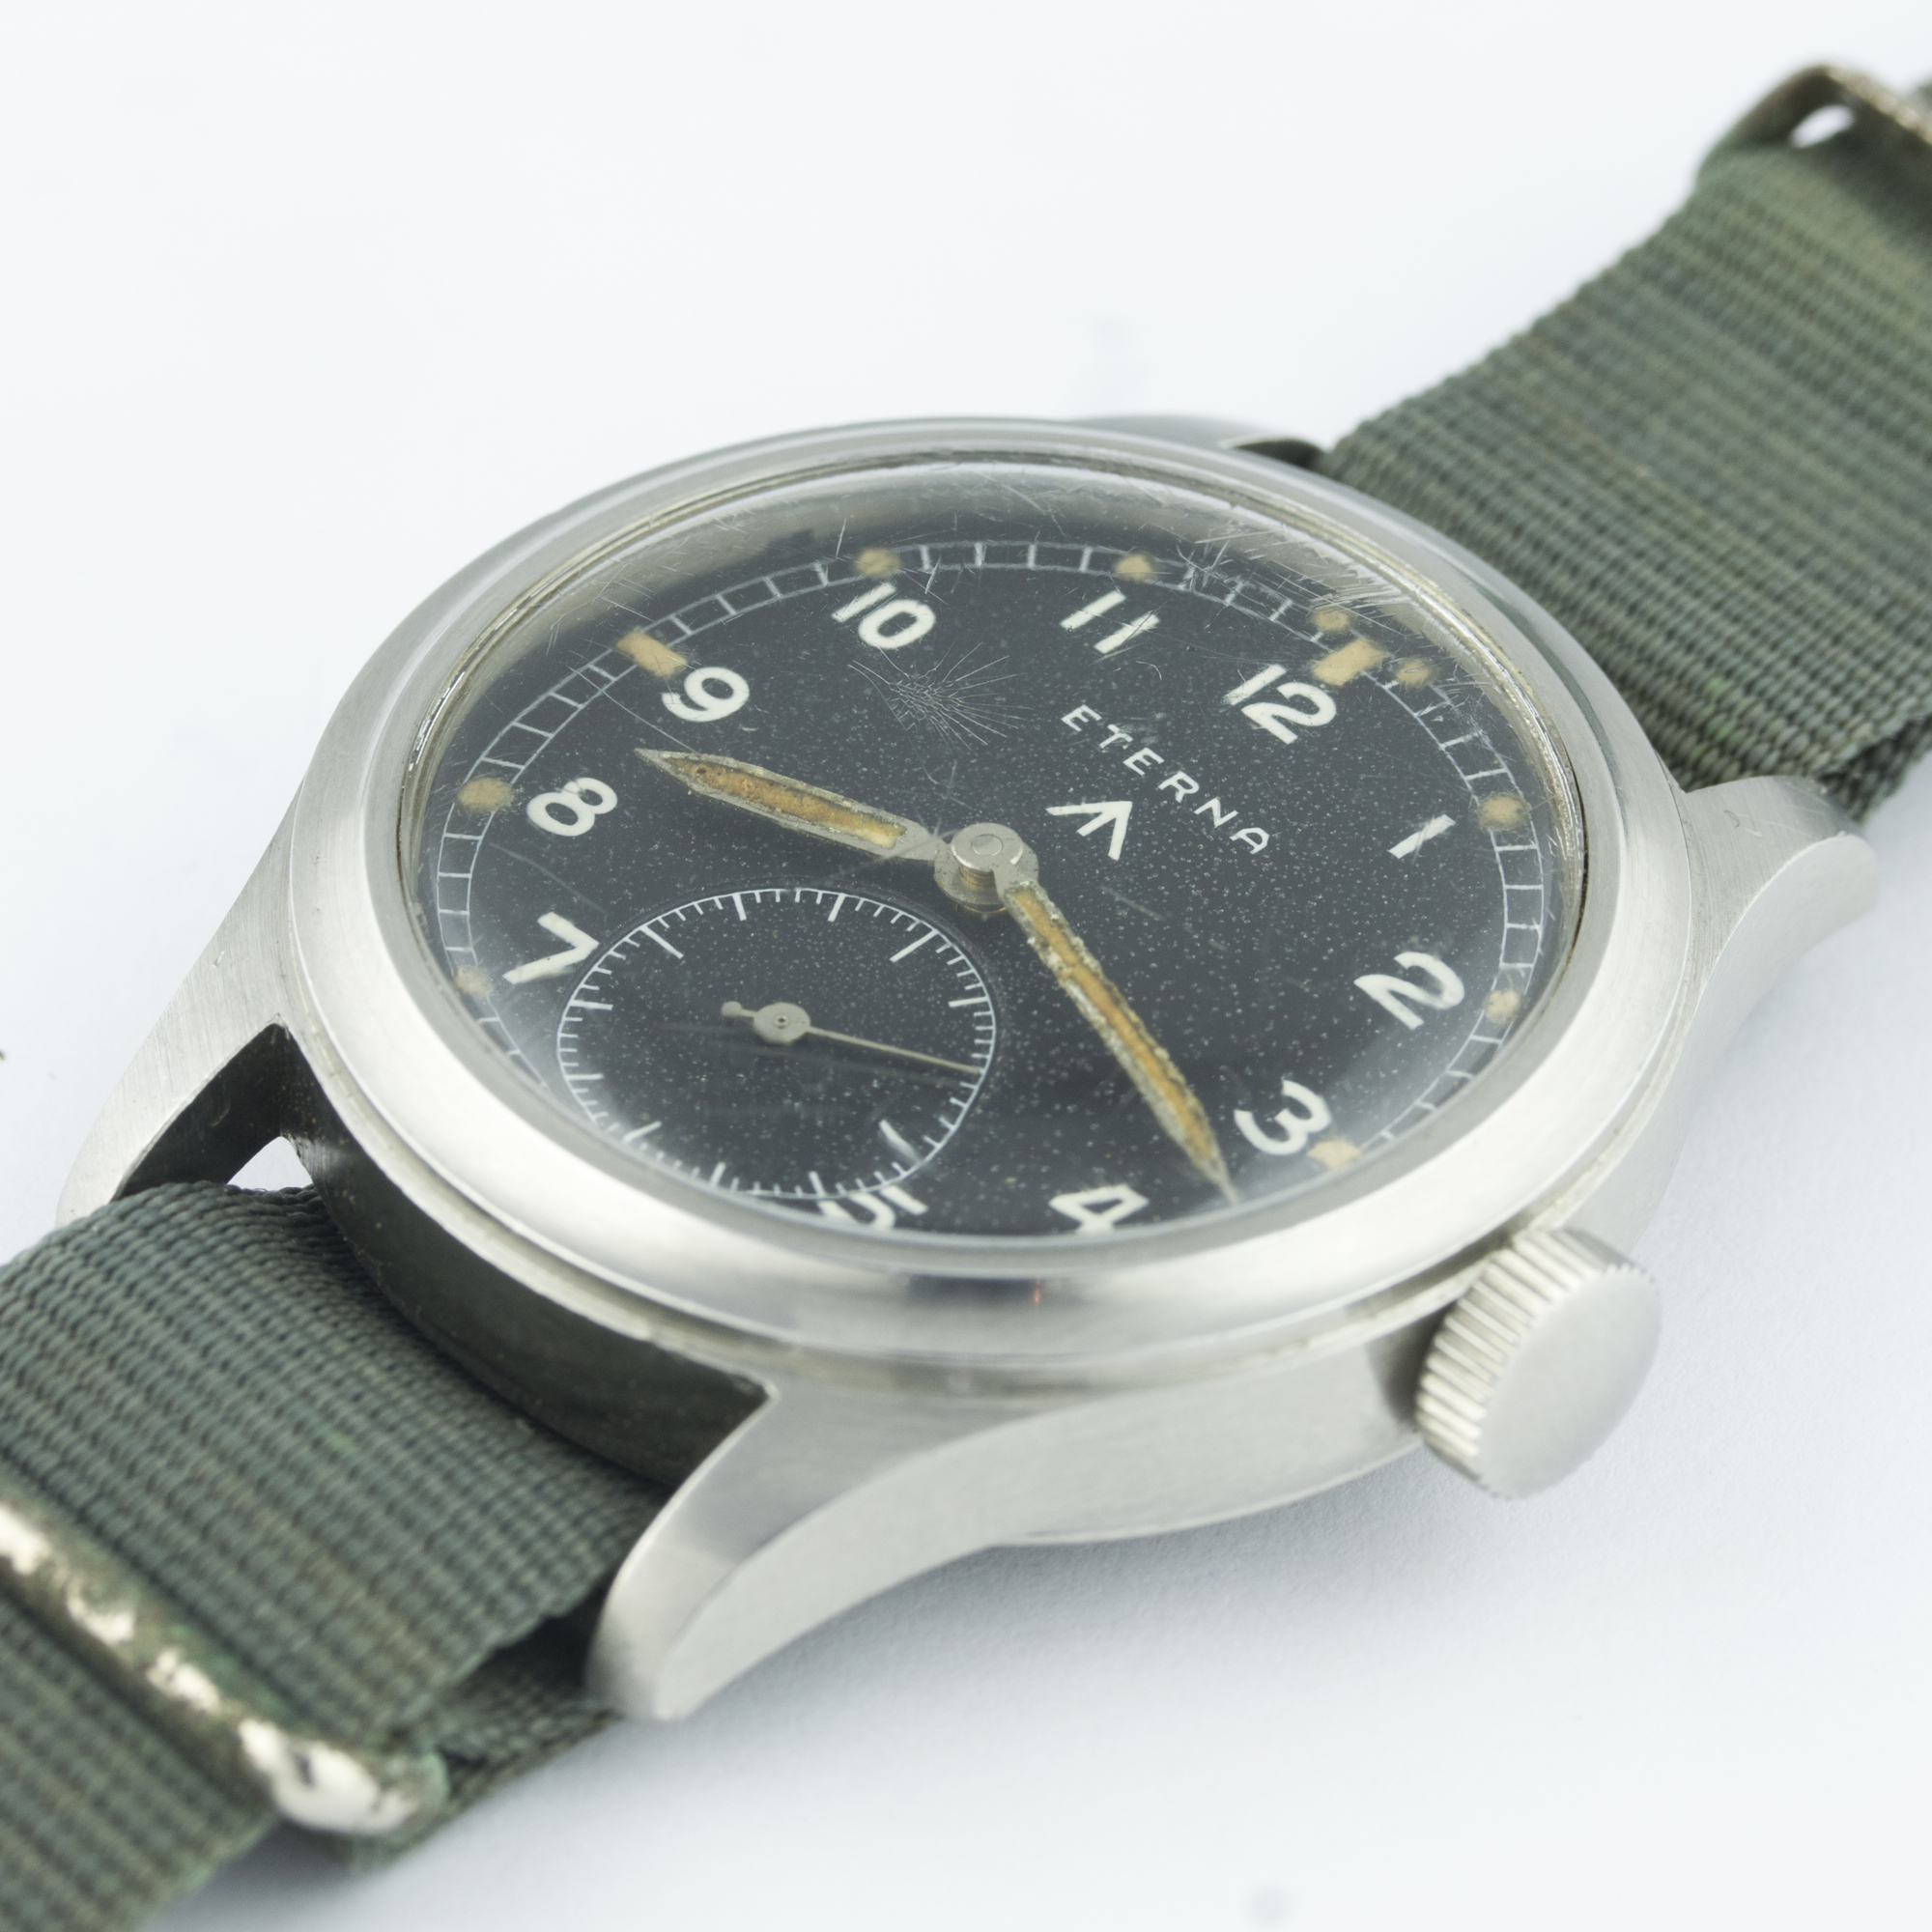 A GENTLEMAN'S STAINLESS STEEL BRITISH MILITARY ETERNA W.W.W. WRIST WATCH CIRCA 1940s PART OF THE " - Image 3 of 8